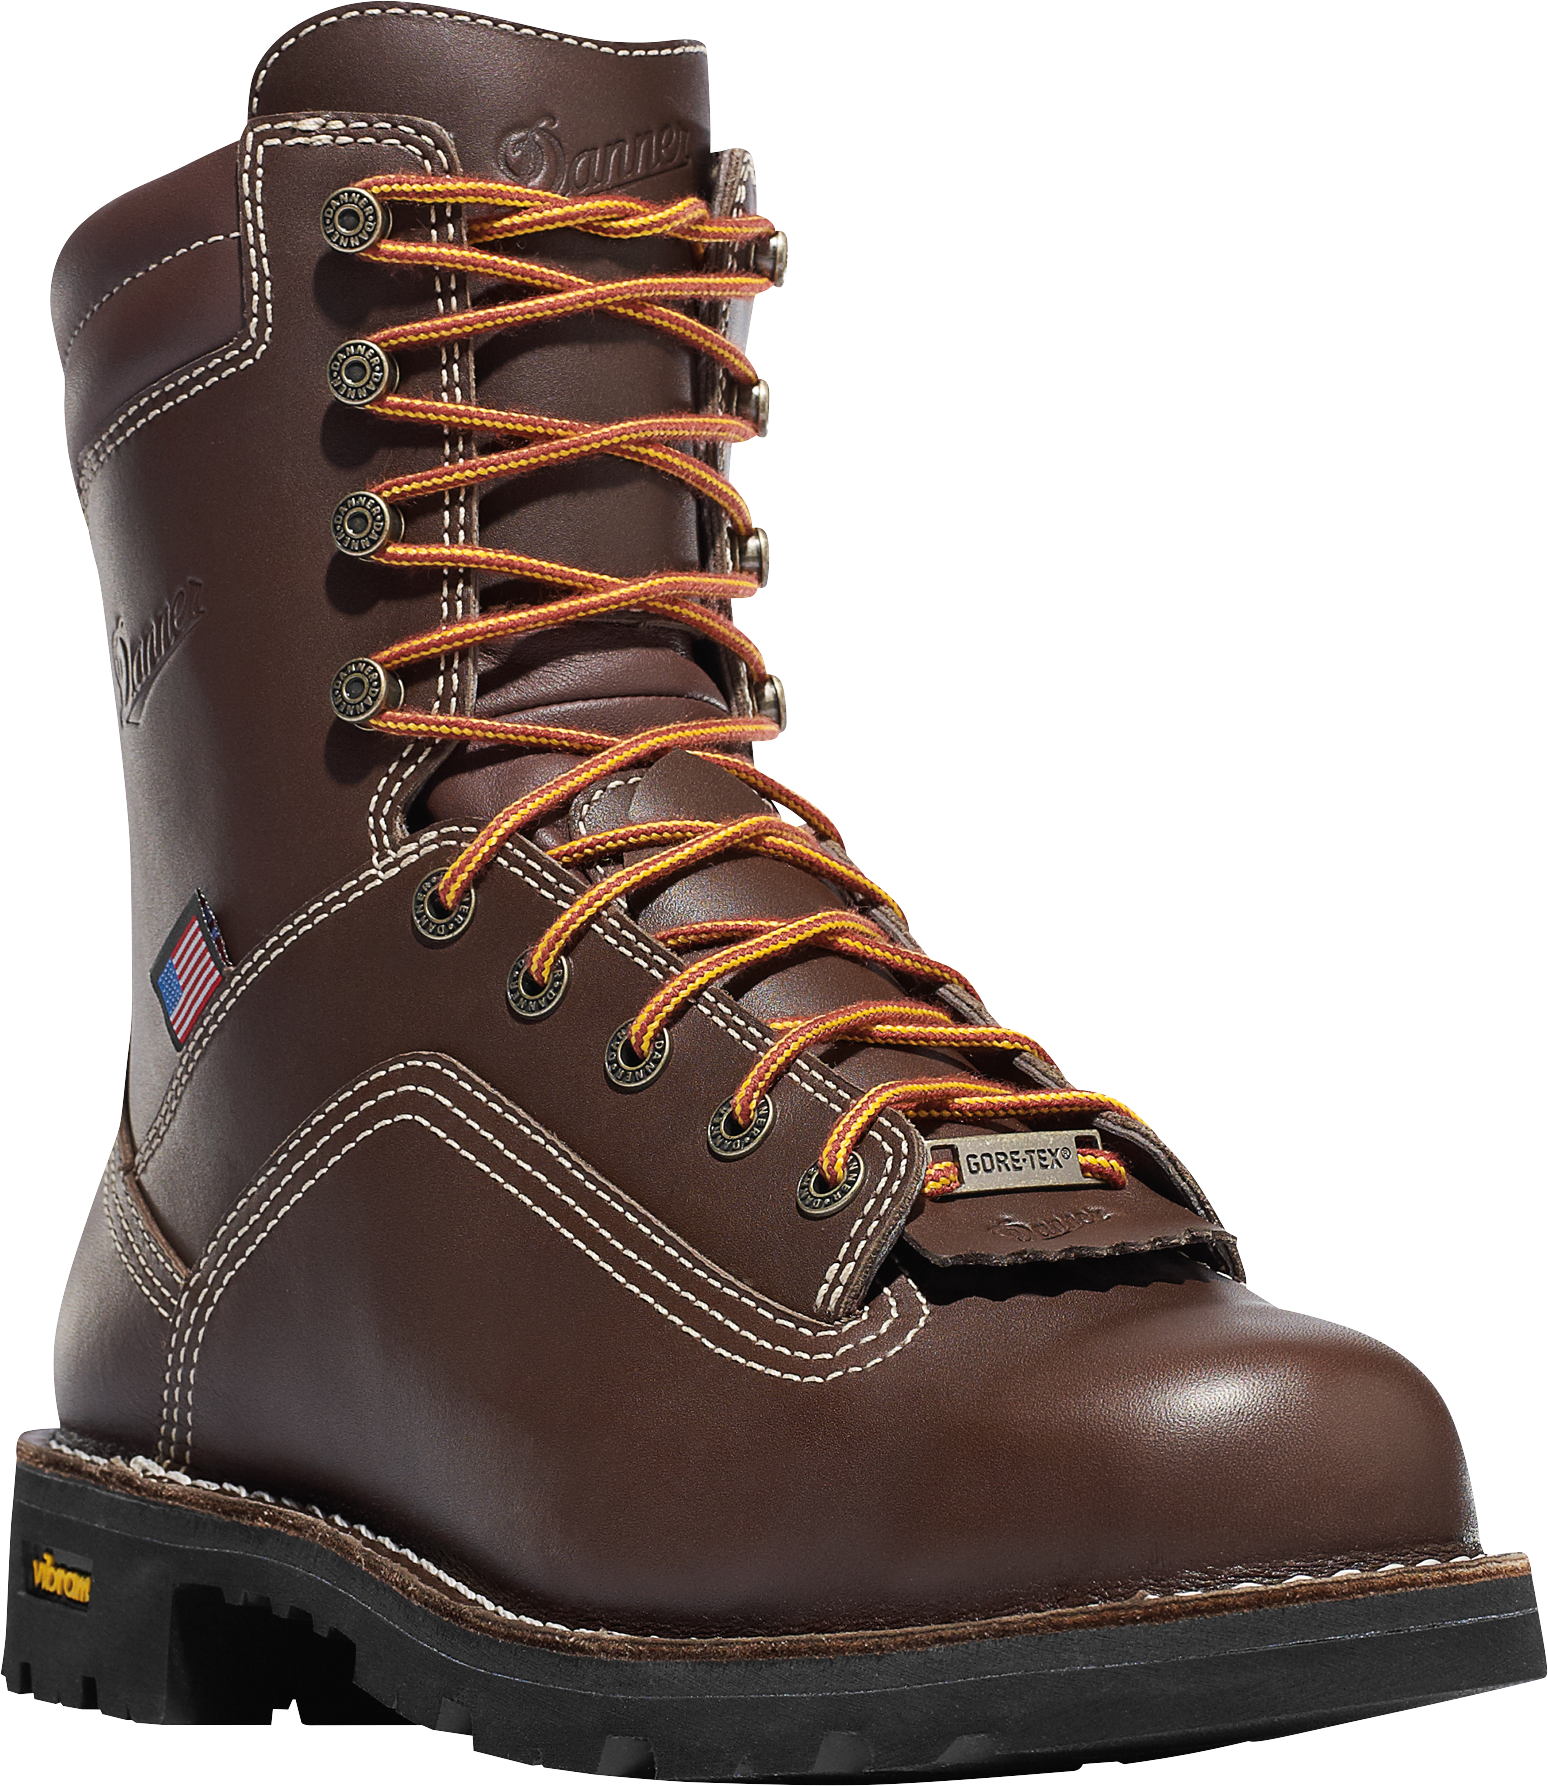 Danner Quarry USA Brown GORE-TEX Alloy Toe Work Boots for Men - Brown - 14W